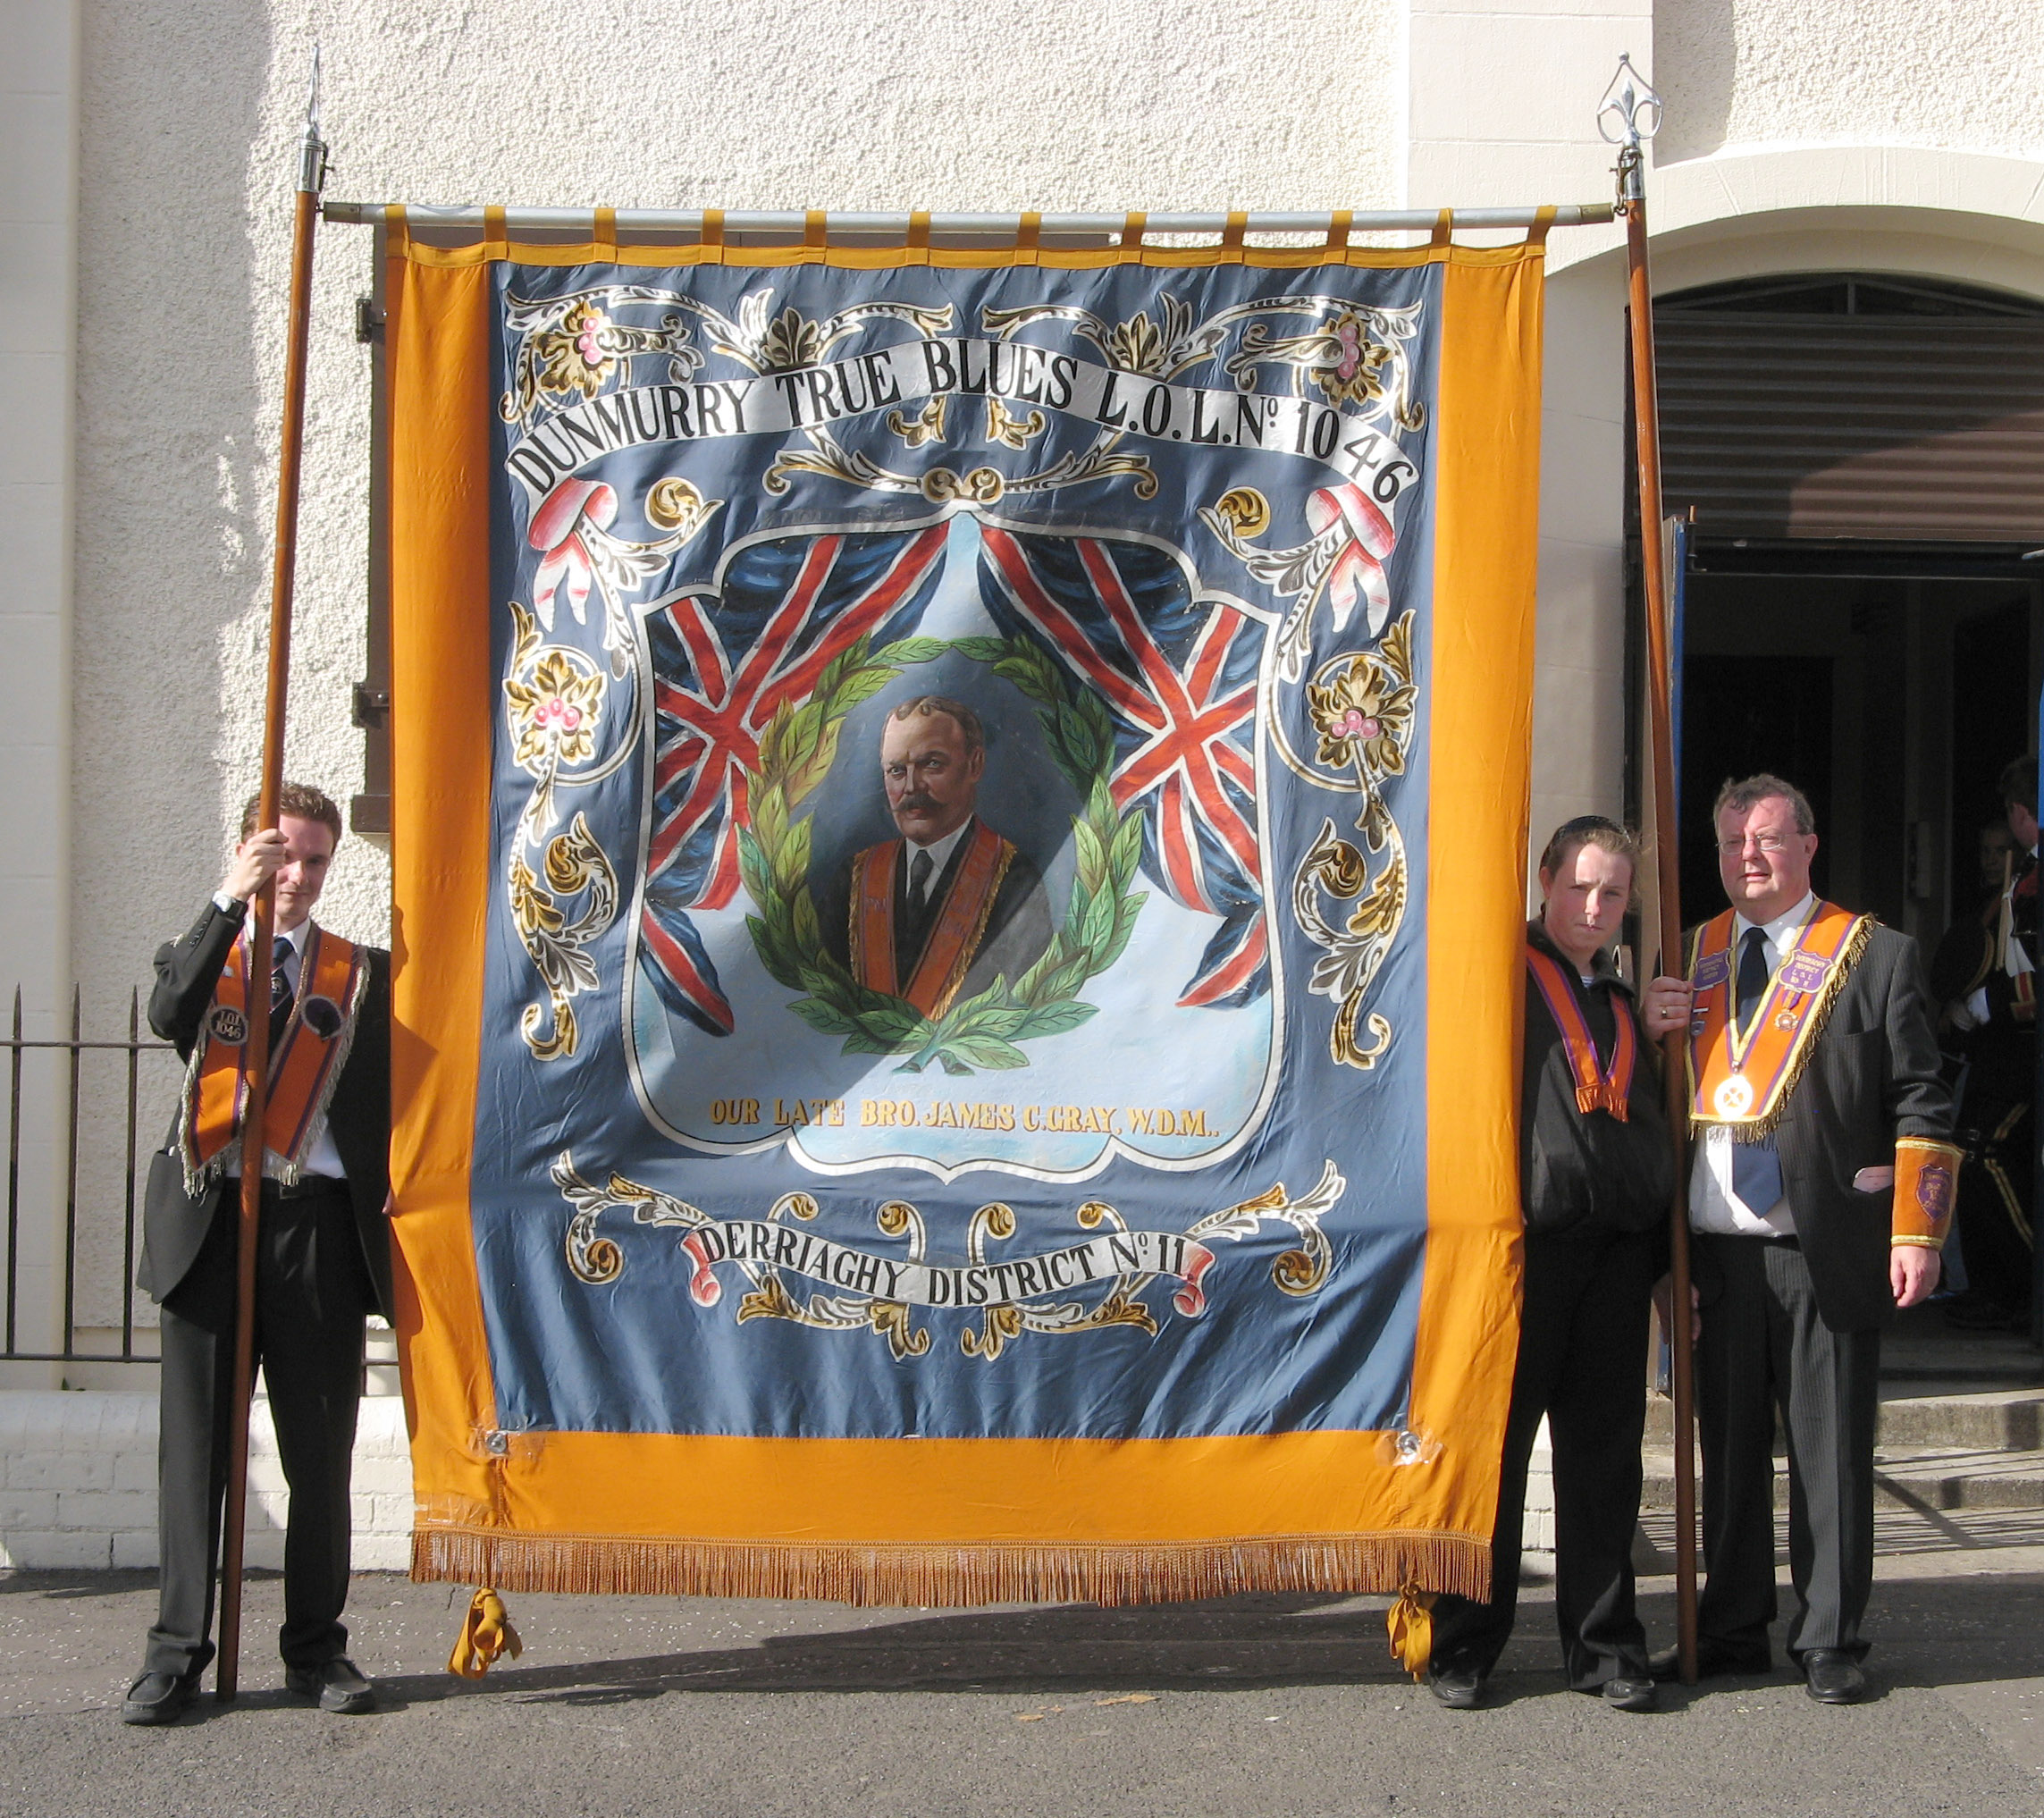 Bro James Connor Gray (Worshipful District Master of Derriaghy LOL No 11) pictured with his daughter Hannah (right) and son Matthew with the banner showing a painting of his grandfather, the late Bro James Connor Gray PDM, who was present when the foundation stones of both Dunmurry Orange Hall and Saint Colmanï¿½s Parish Church in 1908 were laid.